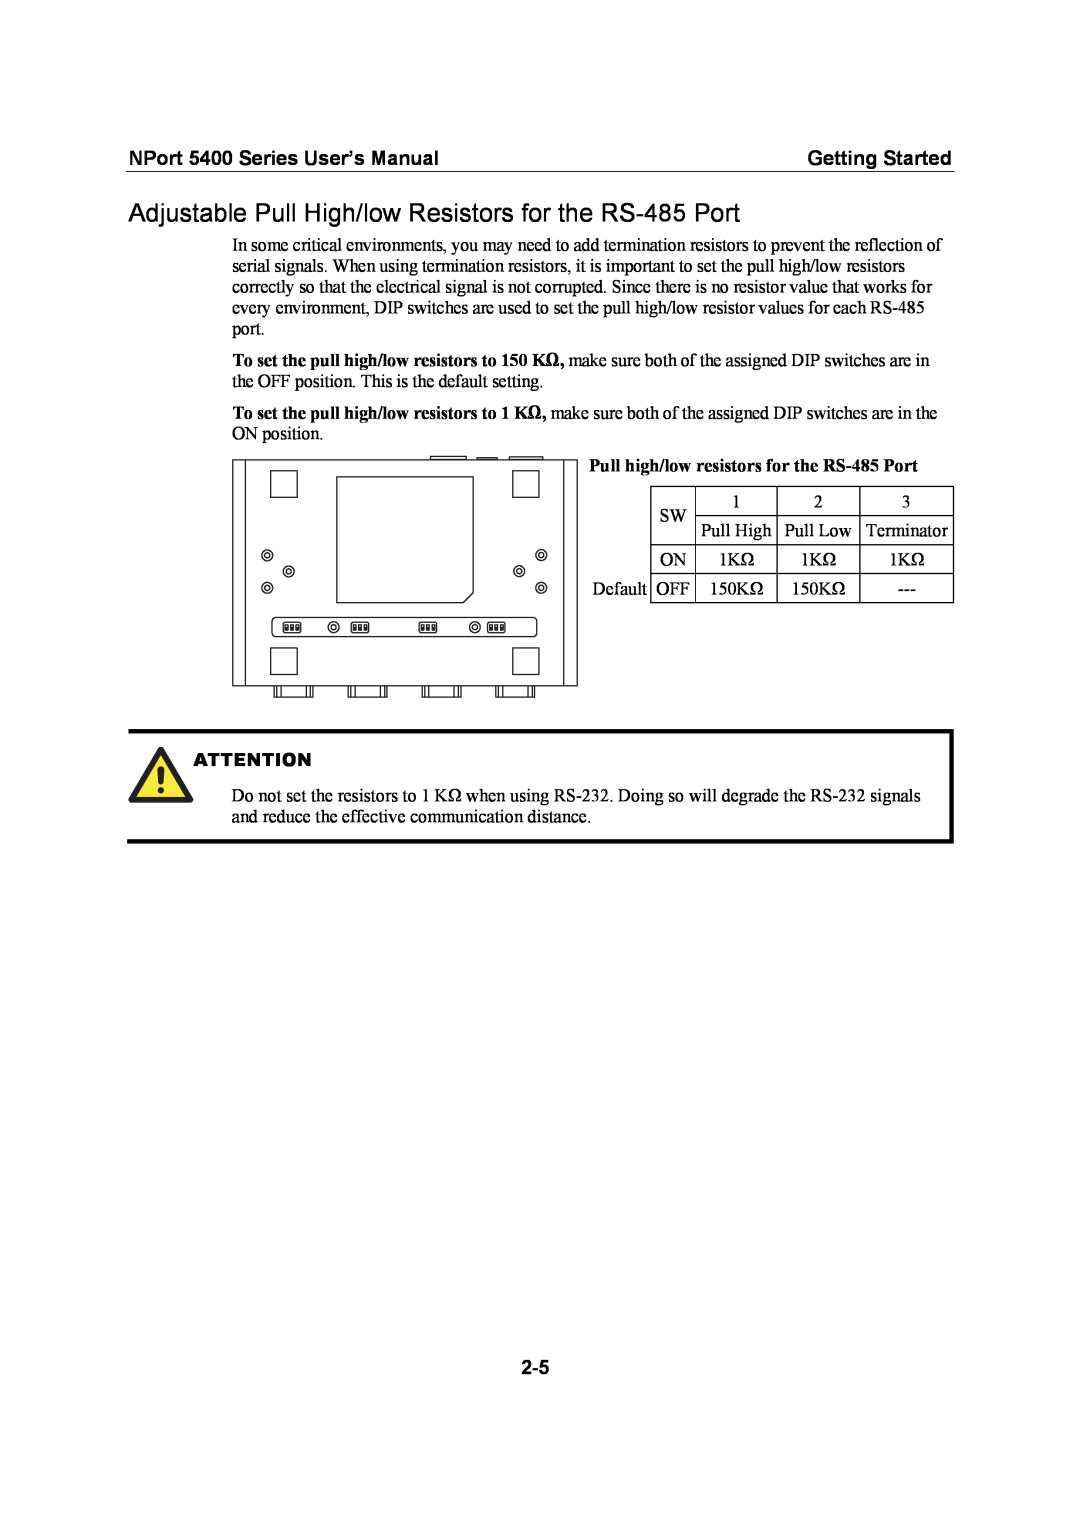 Moxa Technologies 5400 Series user manual Adjustable Pull High/low Resistors for the RS-485 Port, Getting Started 